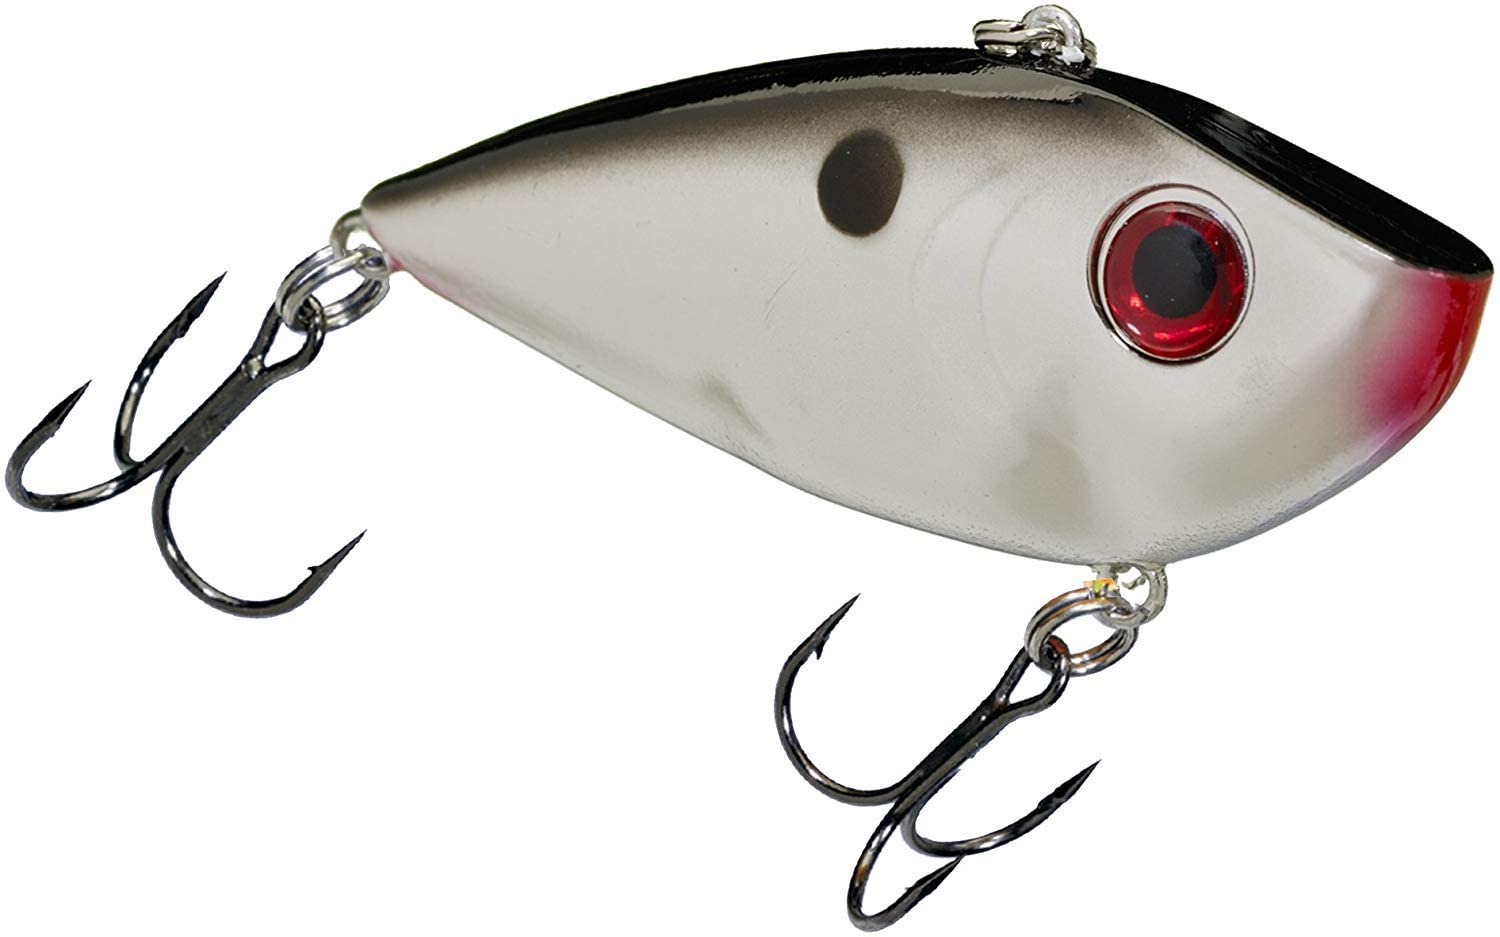 lure eyes fish eyes, lure eyes fish eyes Suppliers and Manufacturers at